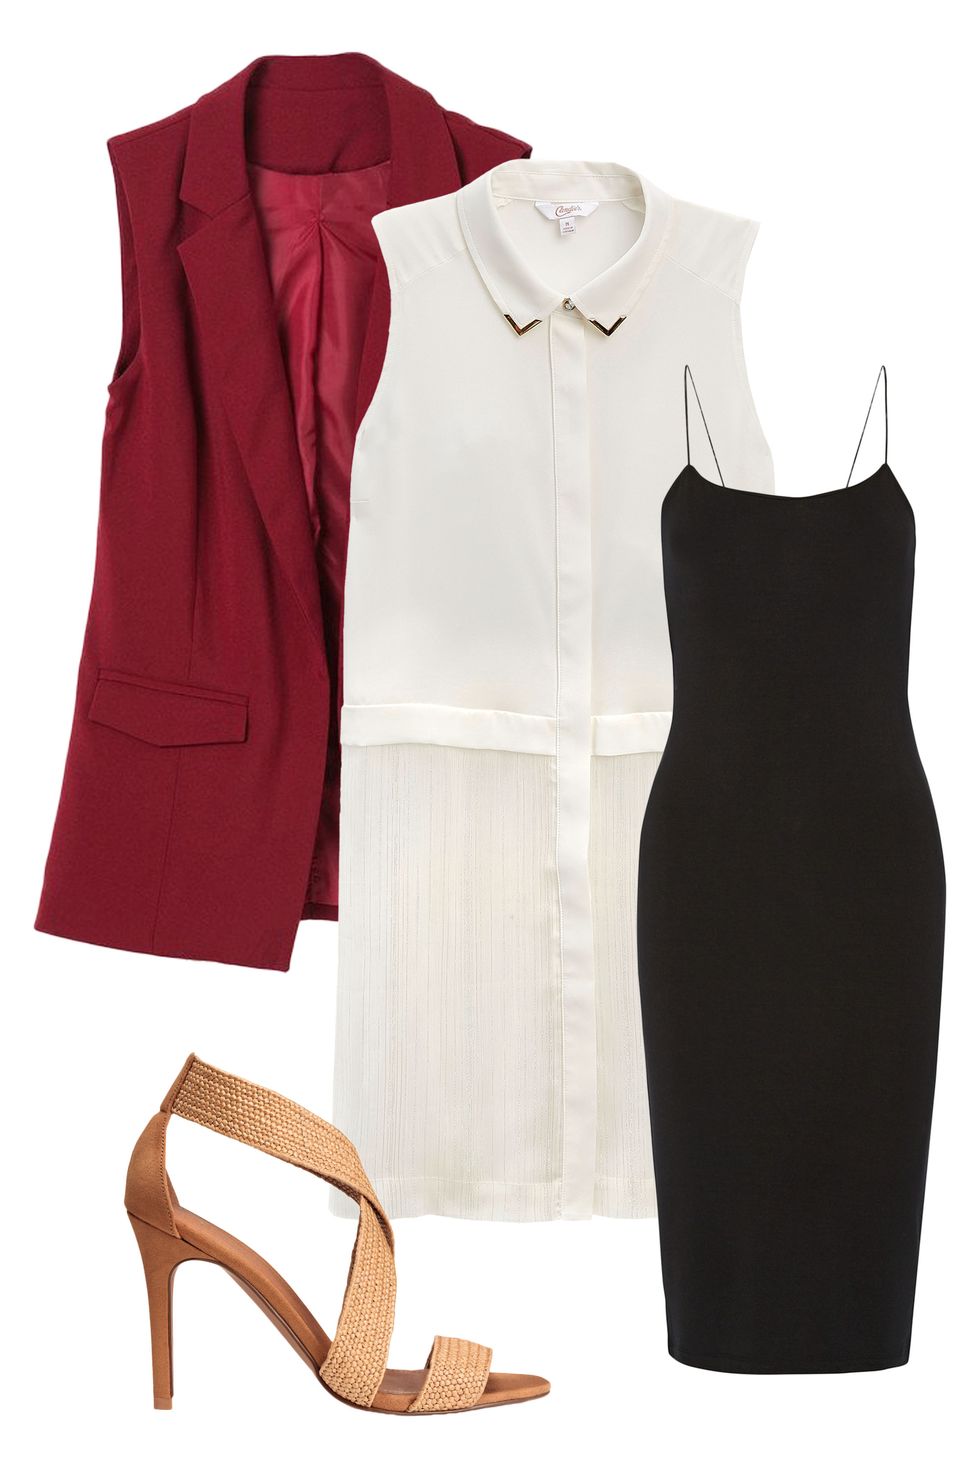 <p>Pair this crisp button-down number with a fitted jersey dress <em>and</em> longline sleeveless vest. These pieces are thin enough to work into your look without making you look like the Michelin Man, while the contrasting hues will set your style apart from a sea of navy pencil skirts. Finish up with a neutral strappy heel, and you're ready to nail that morning meeting. (Actually, an iced coffee would be nice...)</p><p><span></span></p><p><em><br></em></p><p> <em><i><a href="http://www.kohls.com/product/prd-2586786/juniors-candies-button-front-tunic-shirt.jsp?color=Marshmallow&cid=DIS16FallTPR4&utm_campaign=201607_Candies_Cosmo&utm_medium=3p_dis&utm_source=Candies&utm_content=ad_1" target="_blank">Button-Front Tunic Shirt</a>, CANDIE'S, $38</i></em>; <em><a href="https://www.net-a-porter.com/us/en/product/732125/t_by_alexander_wang/cutout-stretch-modal-jersey-dress" target="_blank">Cutout Stretch-Modal Jersey Dress</a>, T BY ALEXANDER WANG, $155; <a href="http://genuine-people.com/products/red-sleeveless-silky-chiffon-vest?variant=10388923589" target="_blank">Sleeveless Long Vest</a>, GENUINE PEOPLE, $45;  <a href="http://www.hm.com/us/product/46894?article=46894-B" target="_blank">Natural Sandals</a>, H&M, $39.99</em></p>